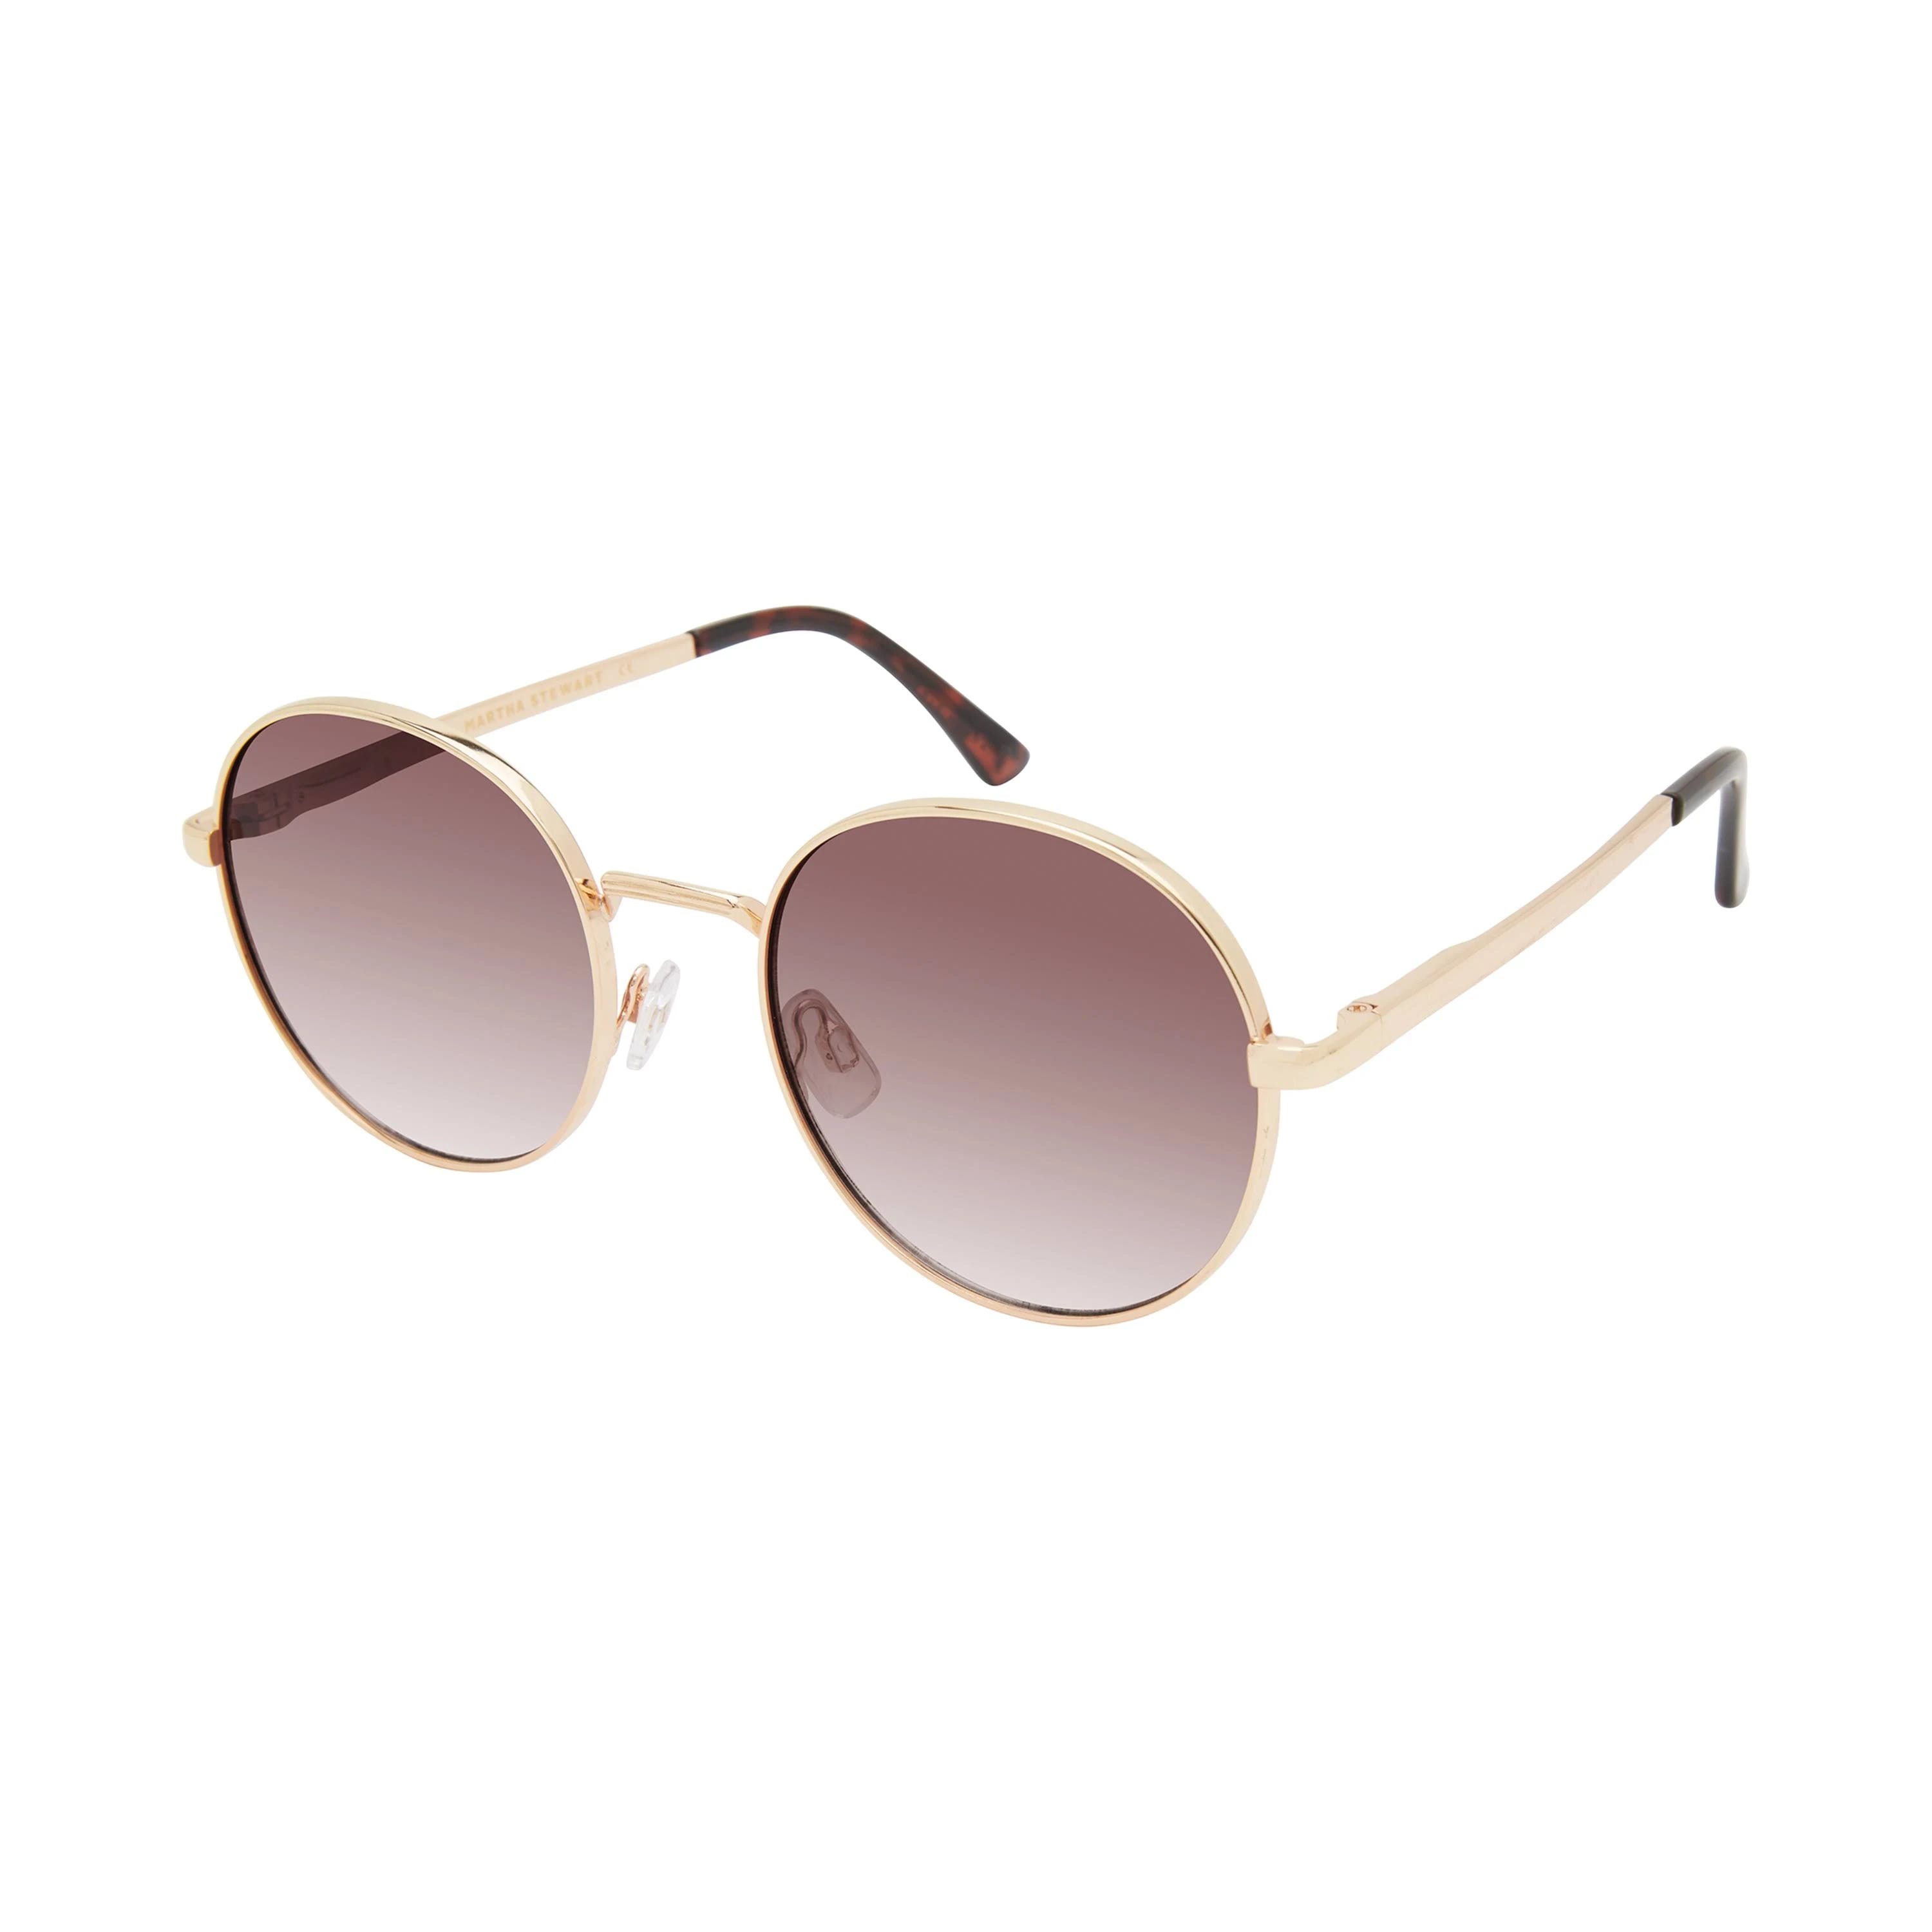 Gold Vintage Round Sunglasses with UV Protection and Spring Hinges | Image